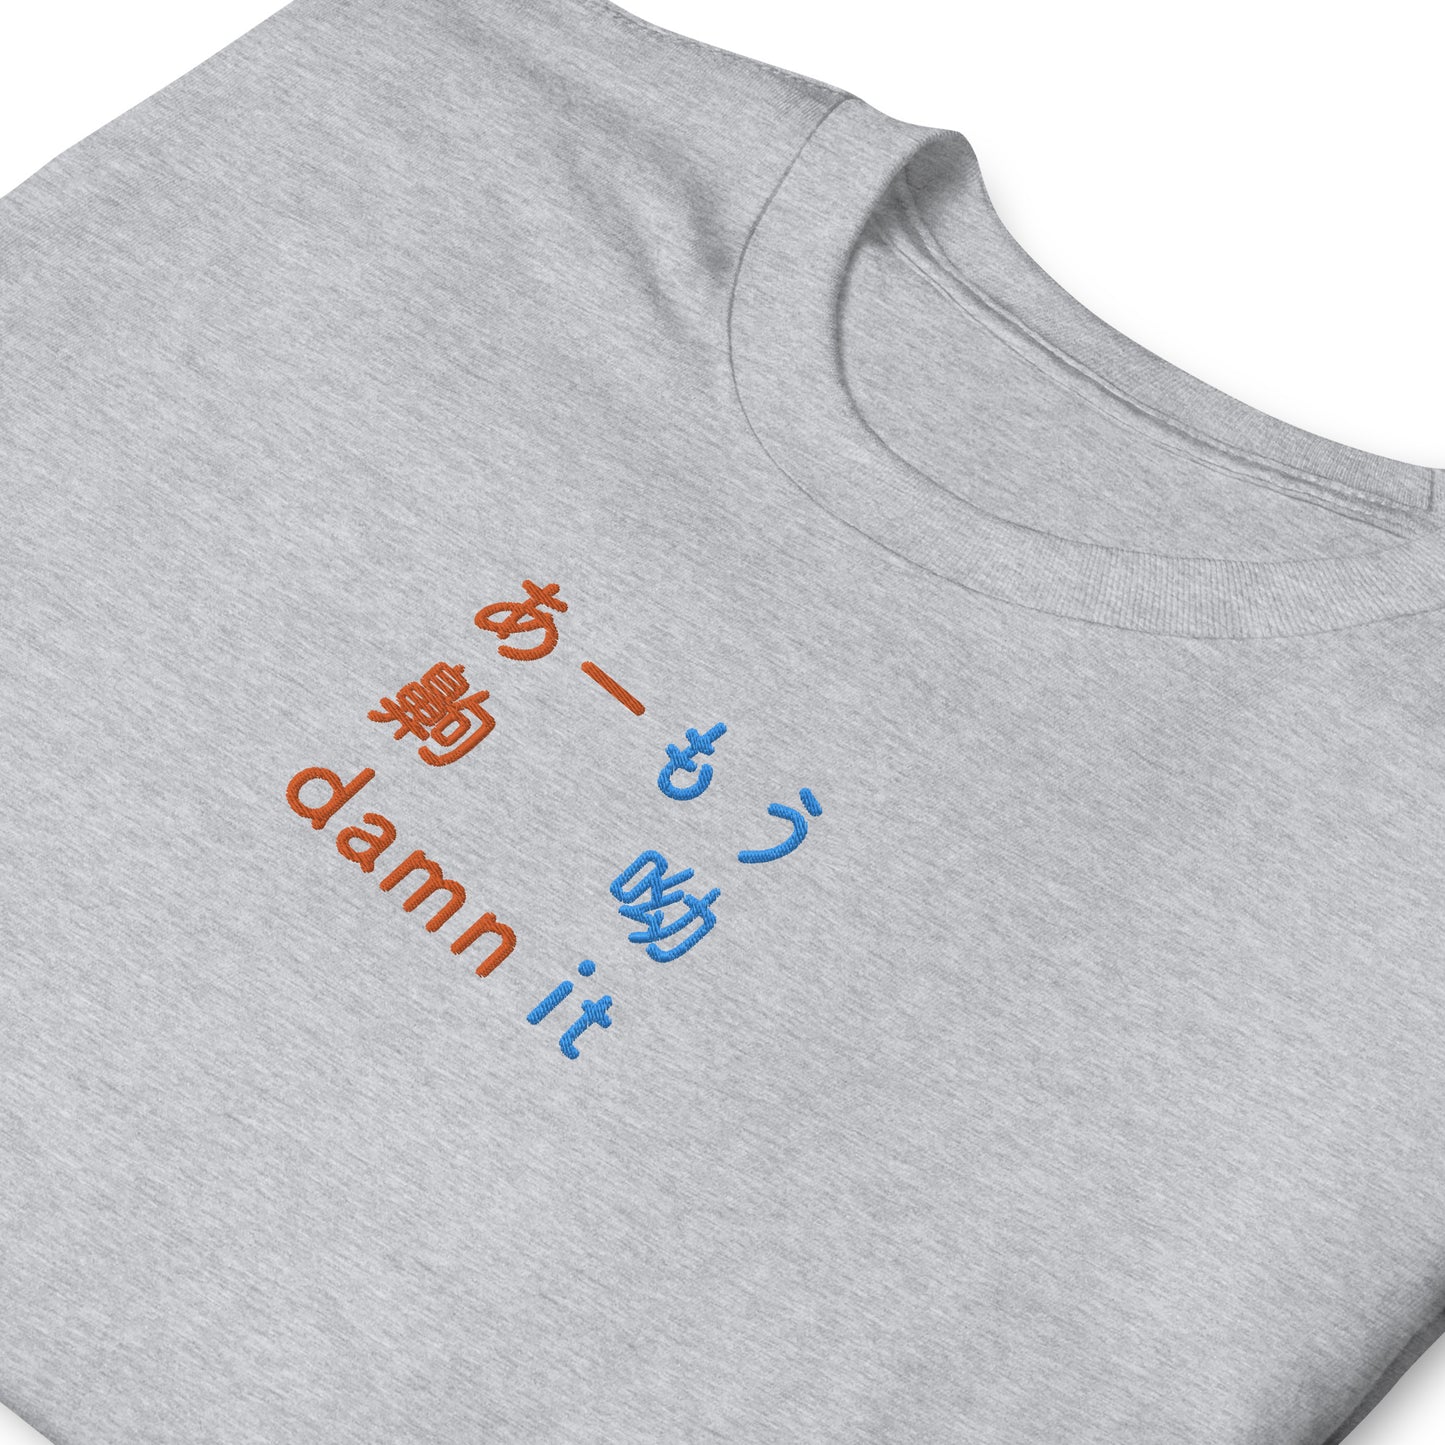 Light Gray High Quality Tee - Front Design with an Orange,Blue Embroidery "Damn it" in Japanese,Chinese and English